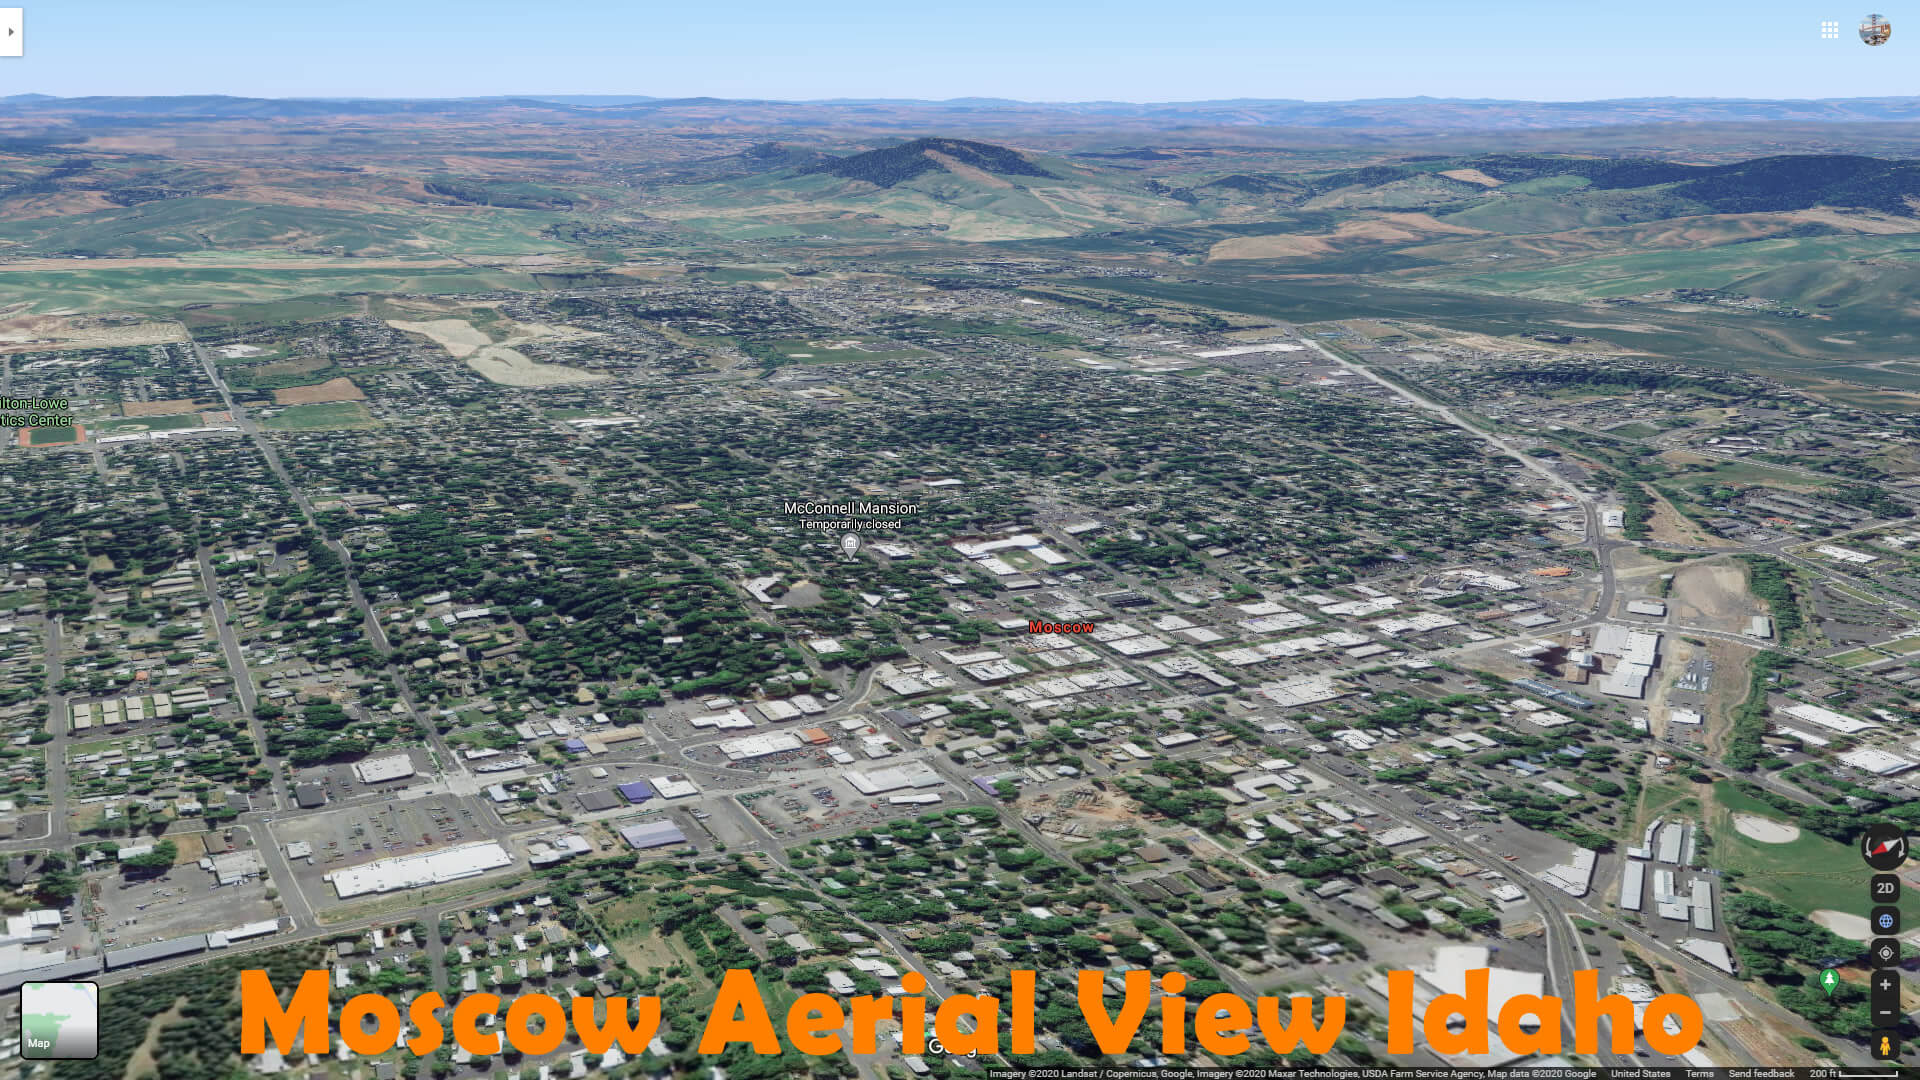 Moscow Aerial View Idaho